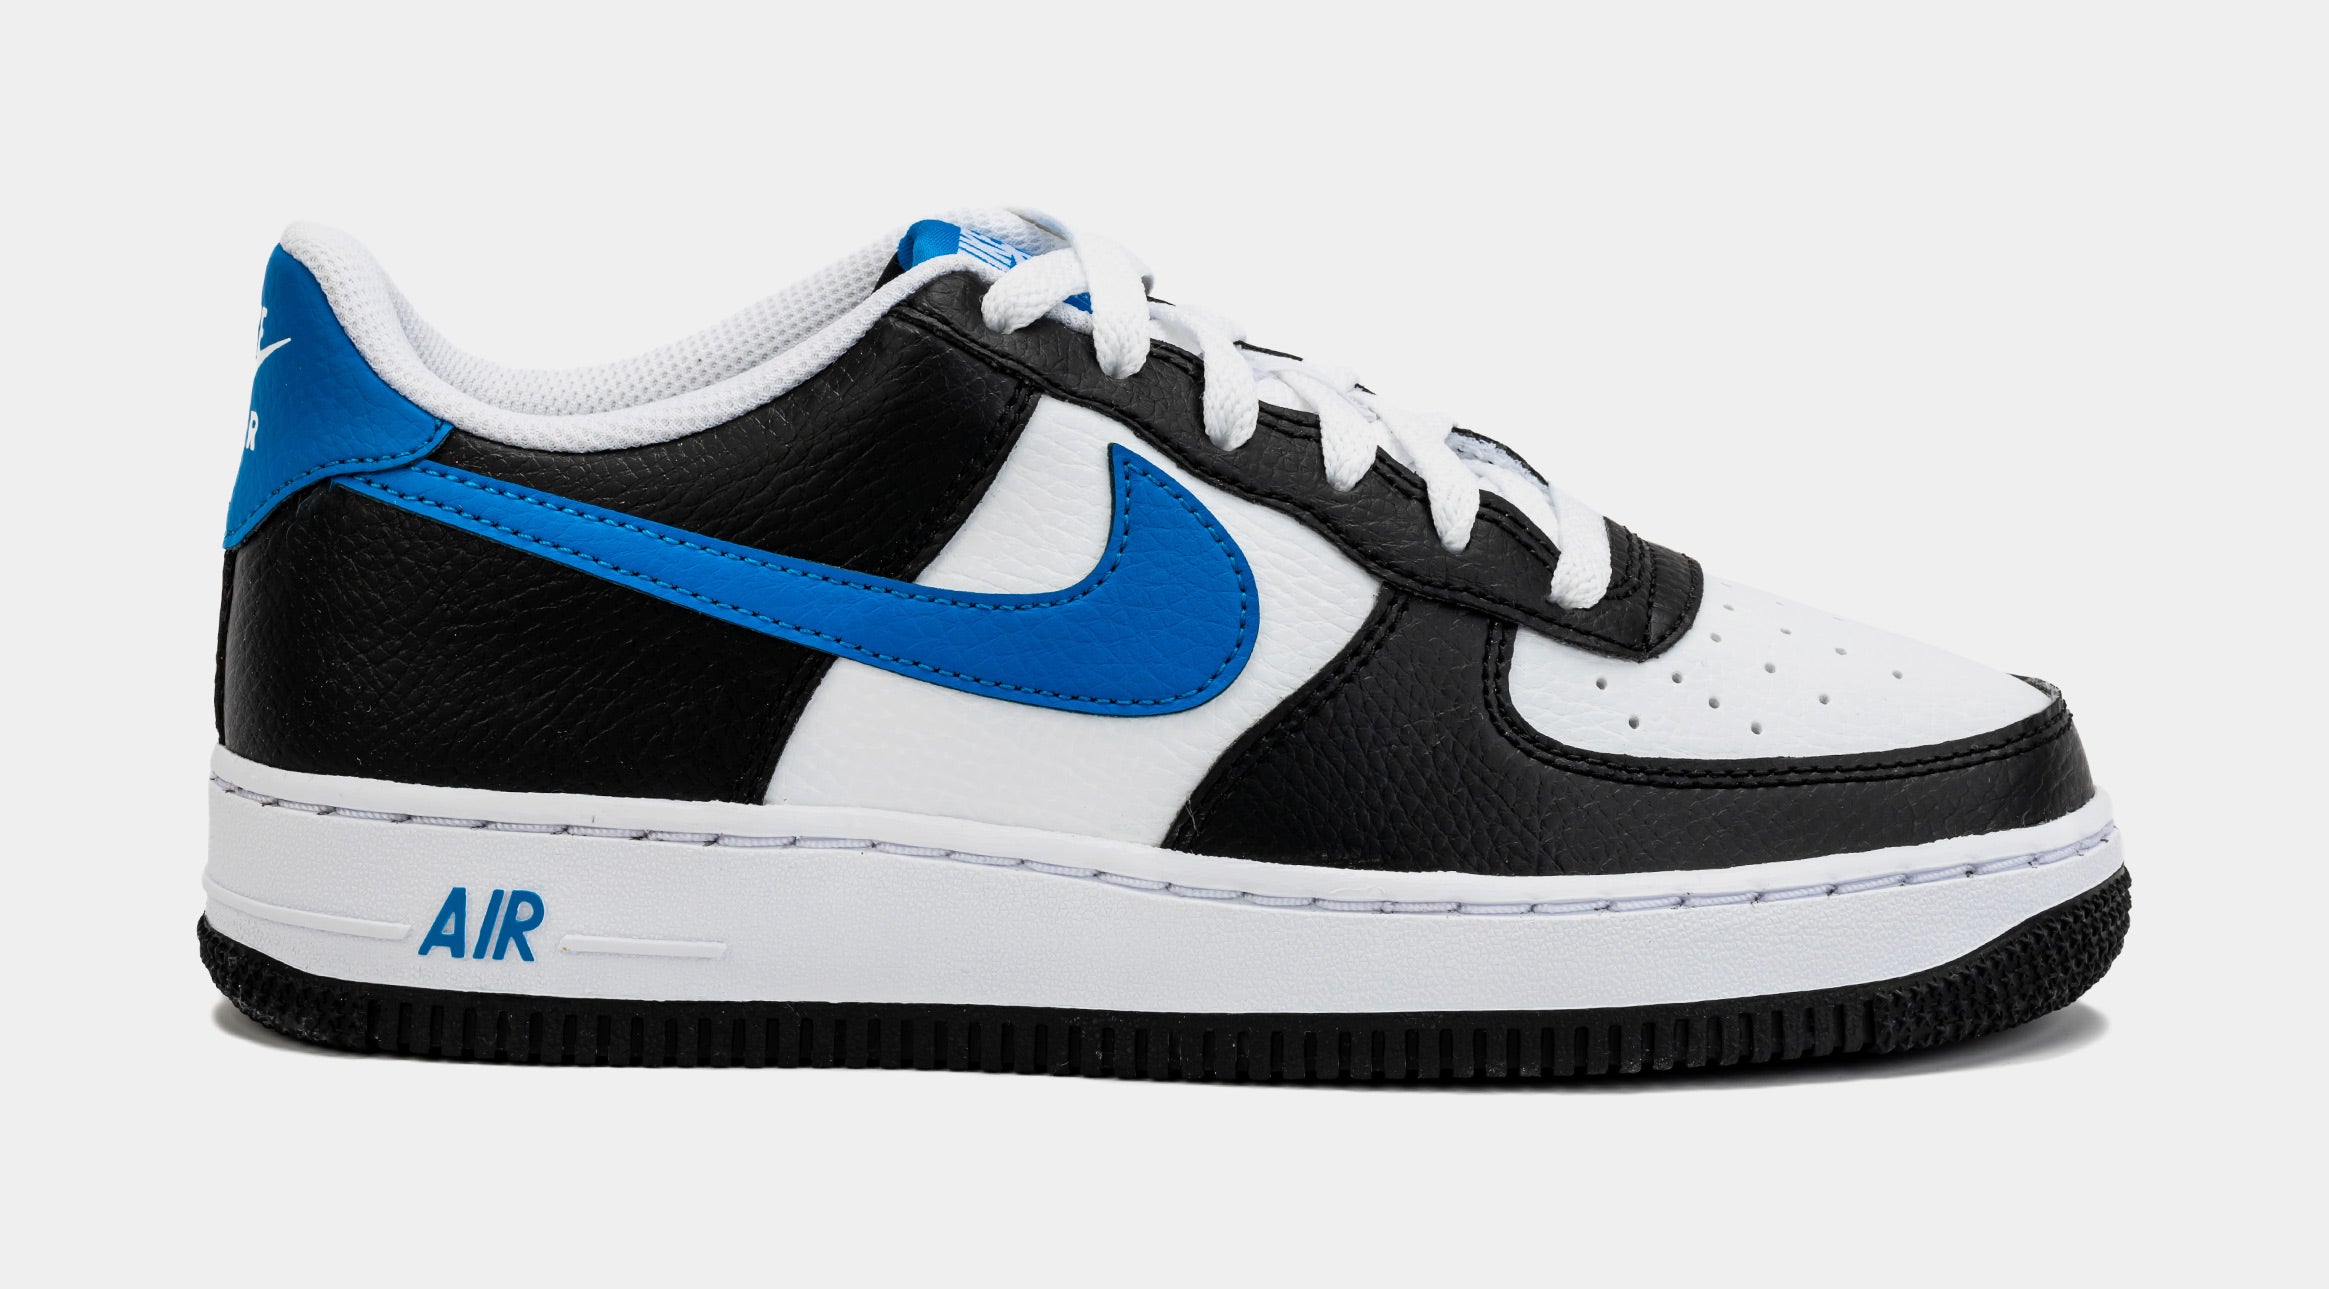 Nike Air Force 1 Grade School Lifestyle Shoes Black Blue FN8008-001 Shoe Palace